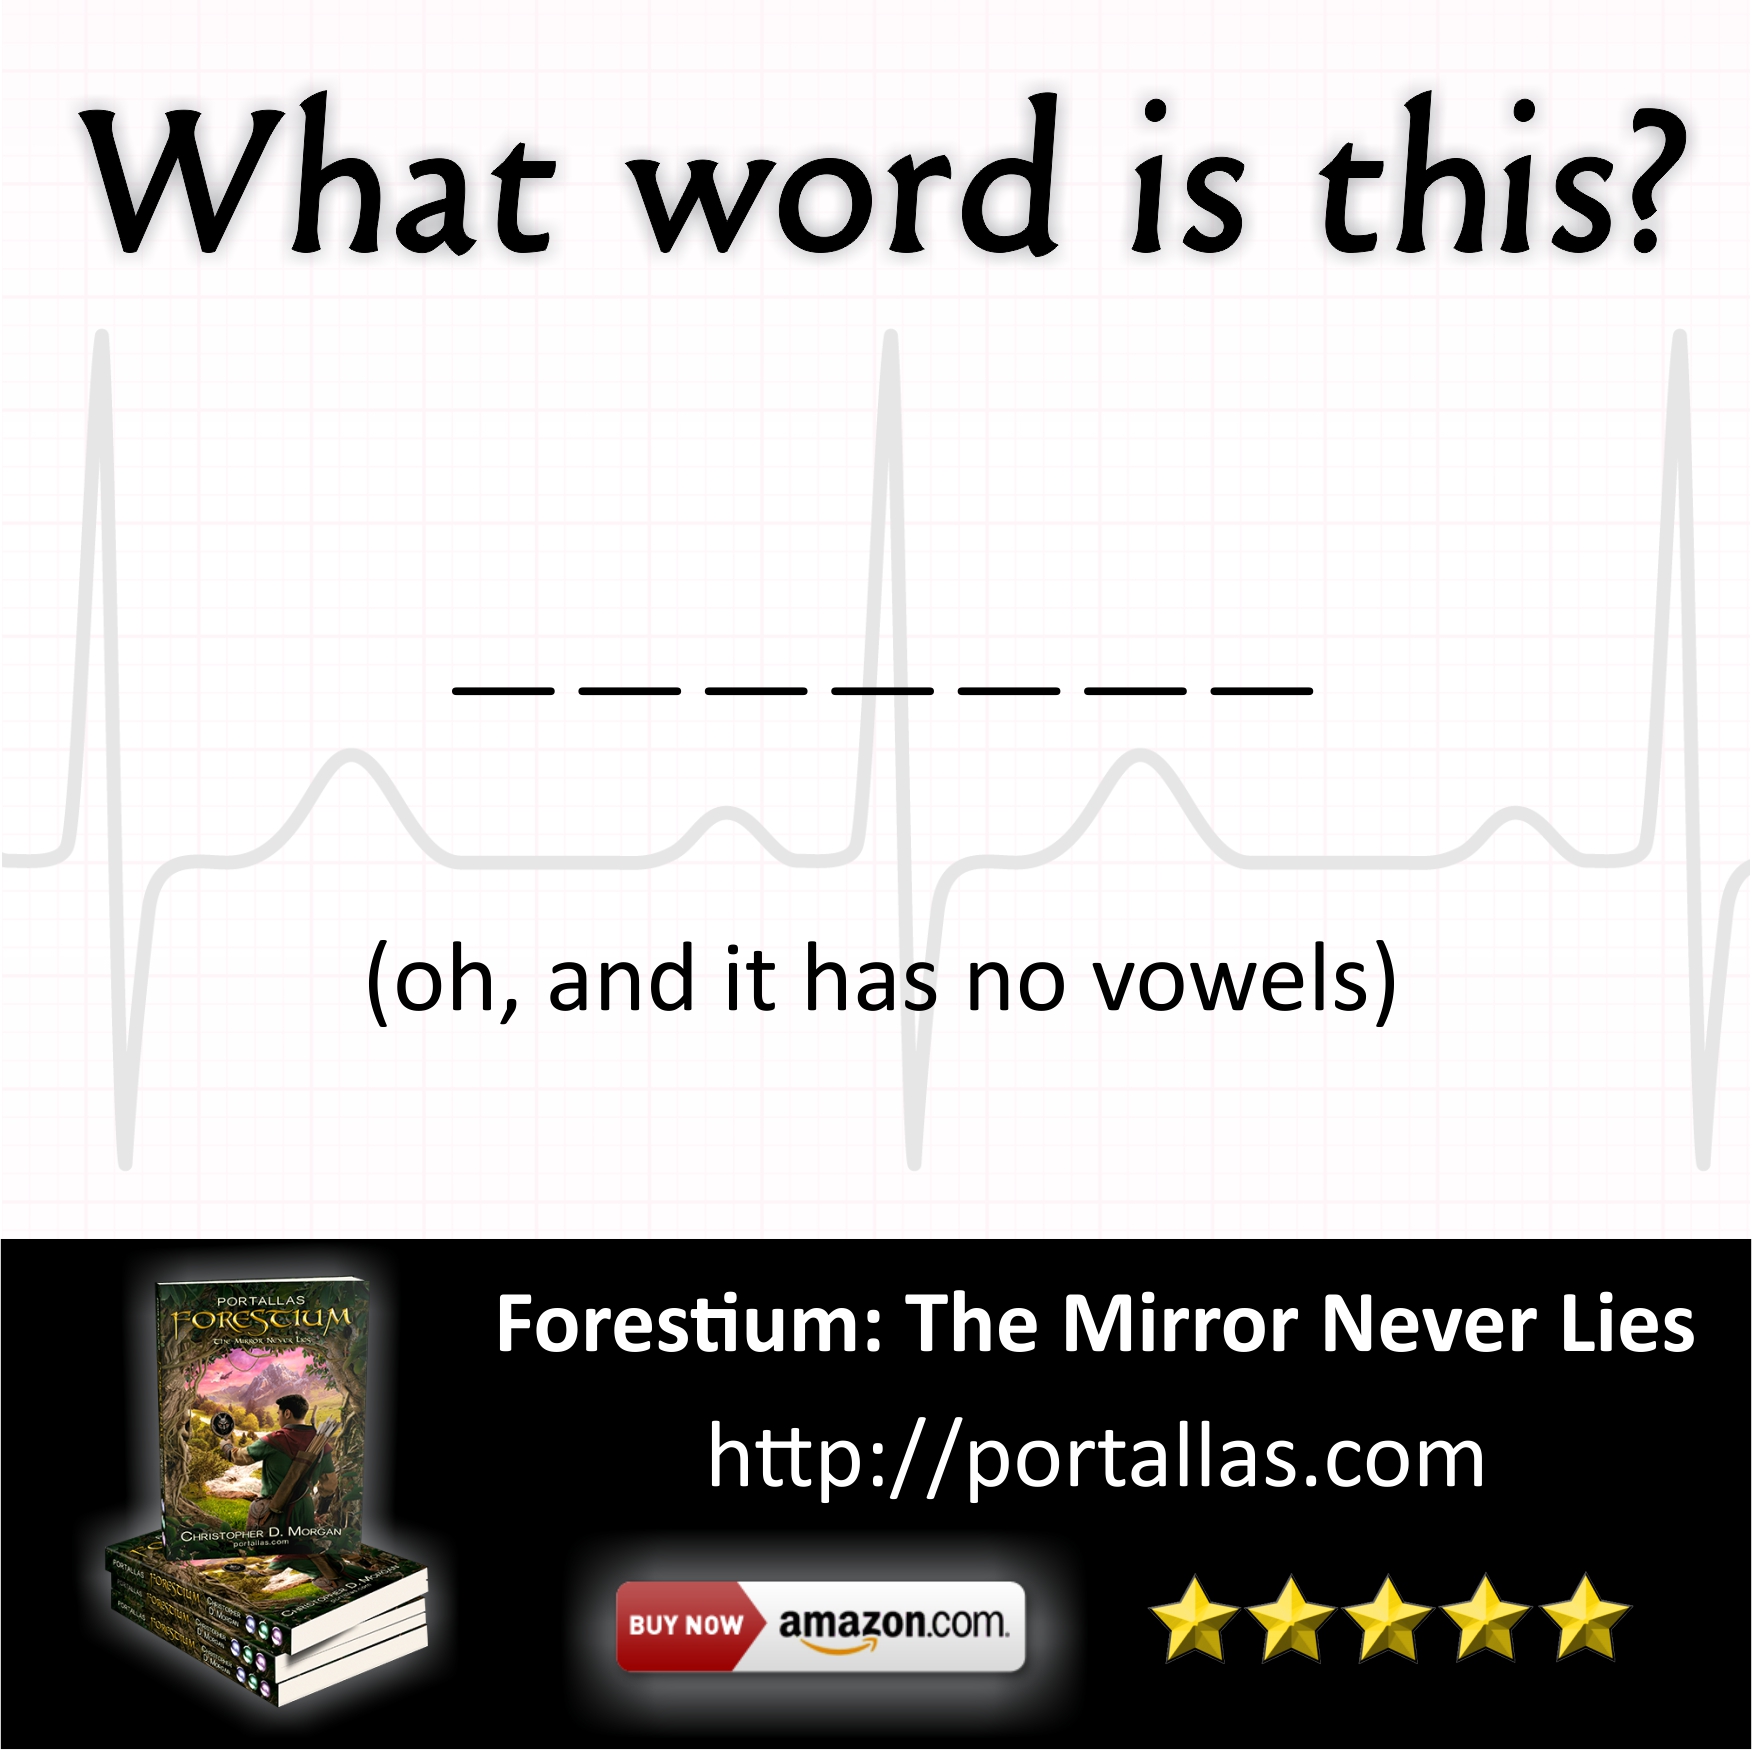 What word?